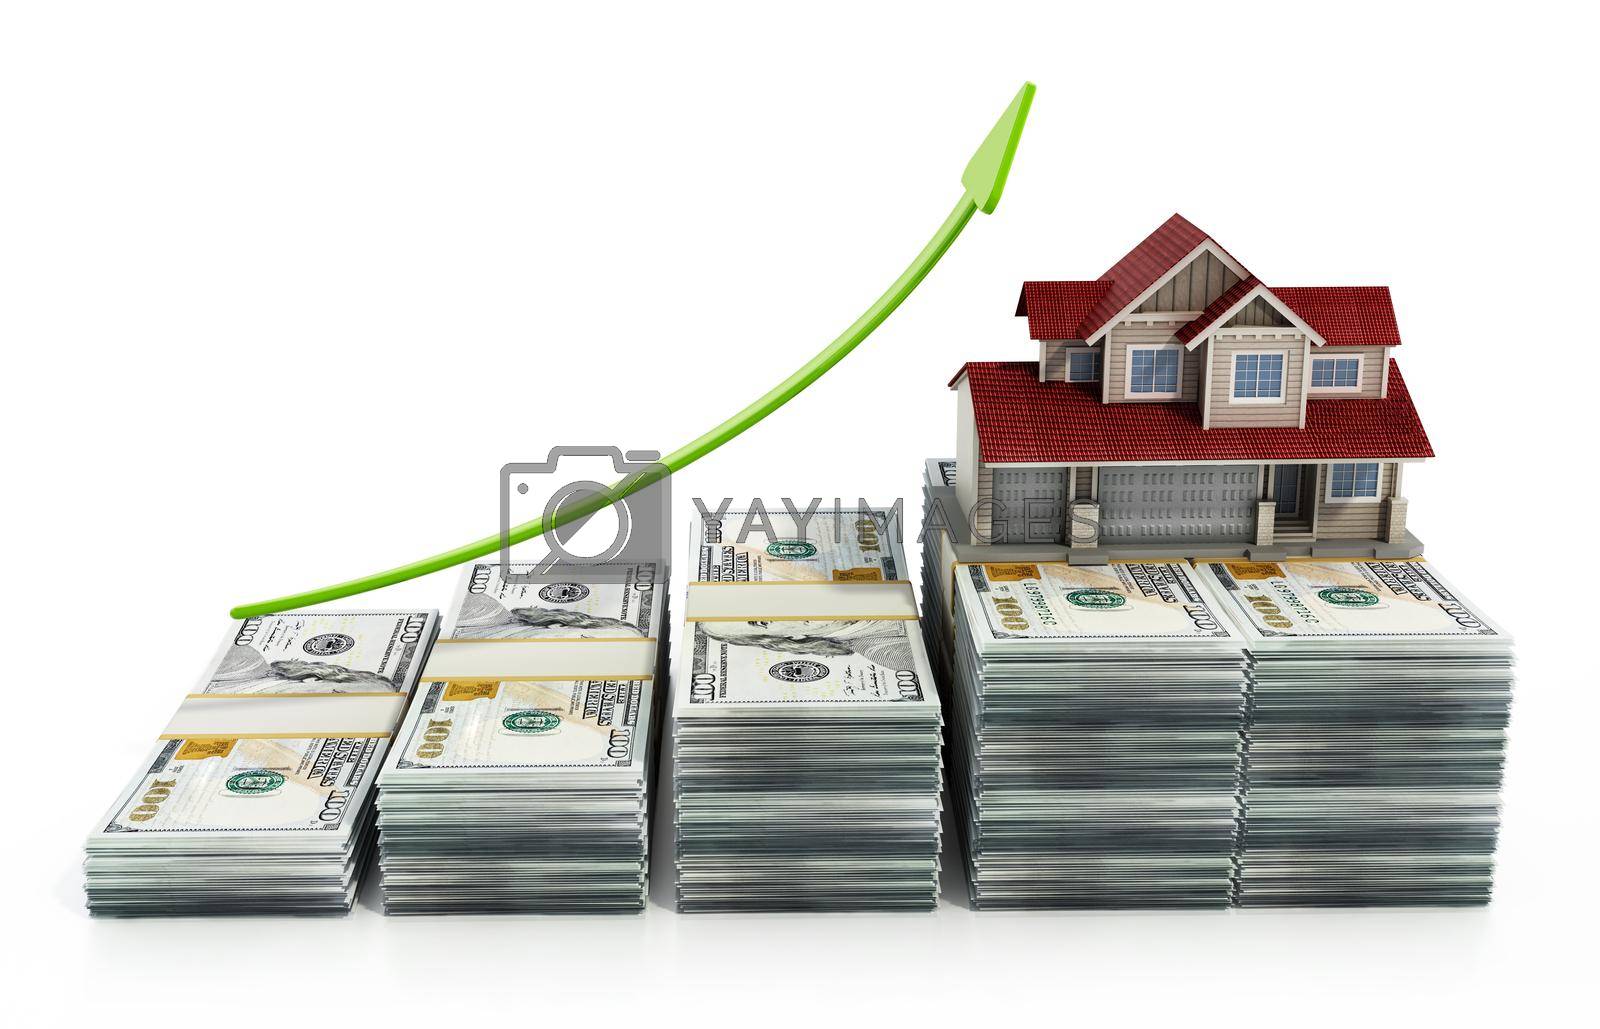 Royalty free image of Luxury house standing on top of dollar bills. Rising house prices concept. 3D illustration by Simsek